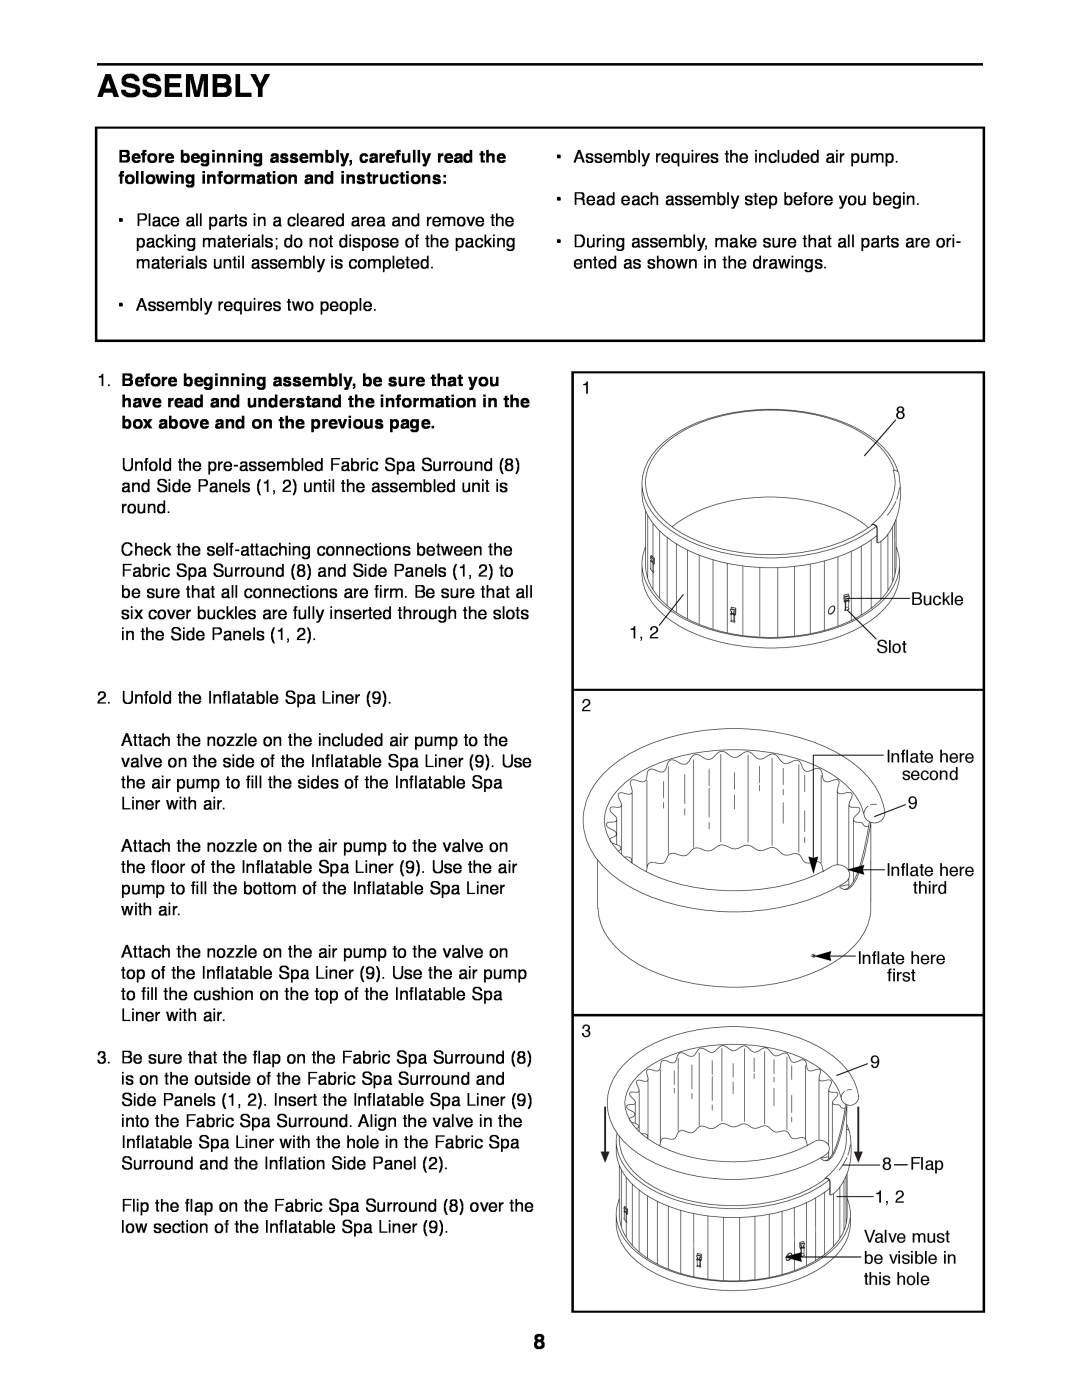 Image IMHS80081 manual Assembly, Before beginning assembly, carefully read the, following information and instructions 